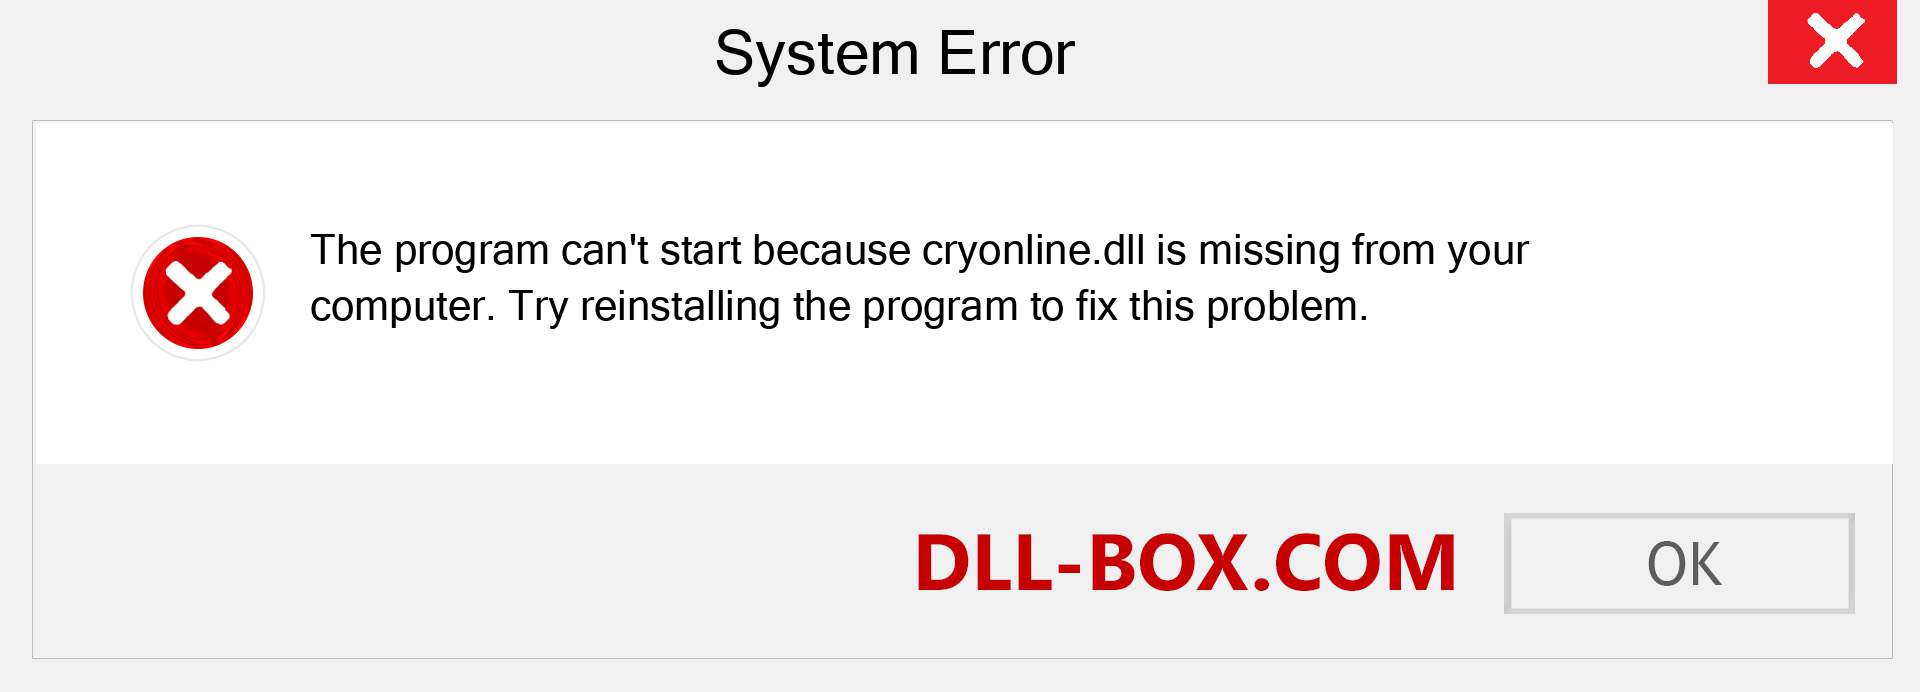  cryonline.dll file is missing?. Download for Windows 7, 8, 10 - Fix  cryonline dll Missing Error on Windows, photos, images